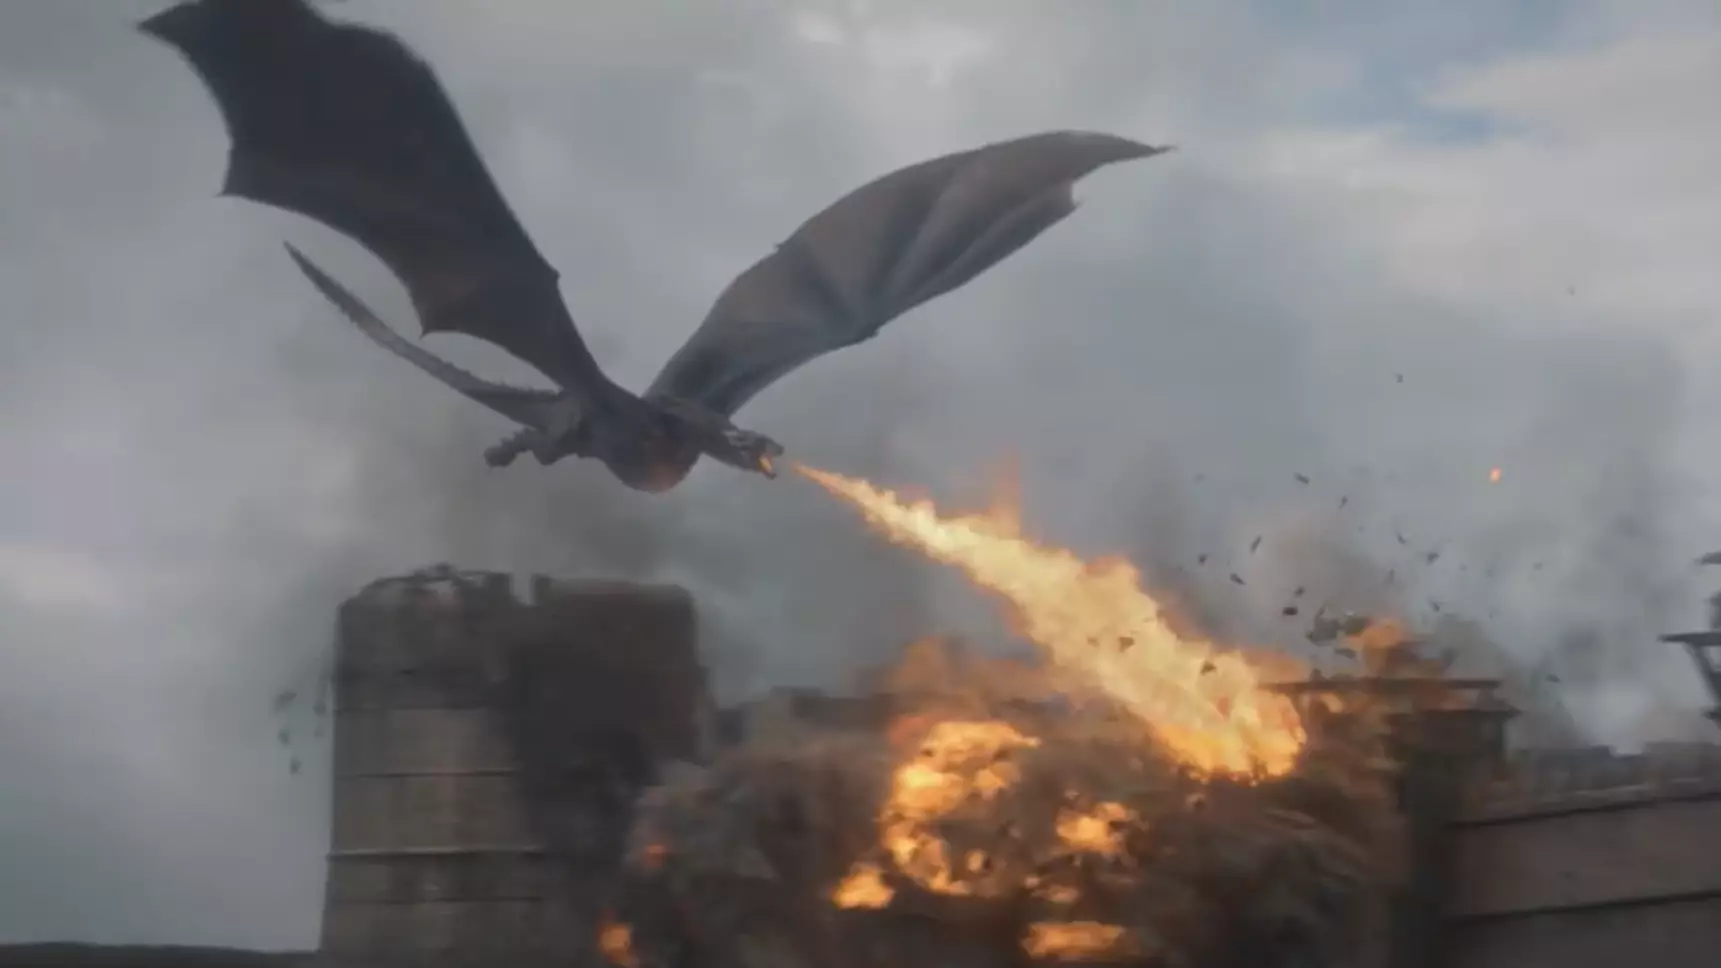 ​Game Of Thrones Fans Don’t Know How To Feel After Latest Episode